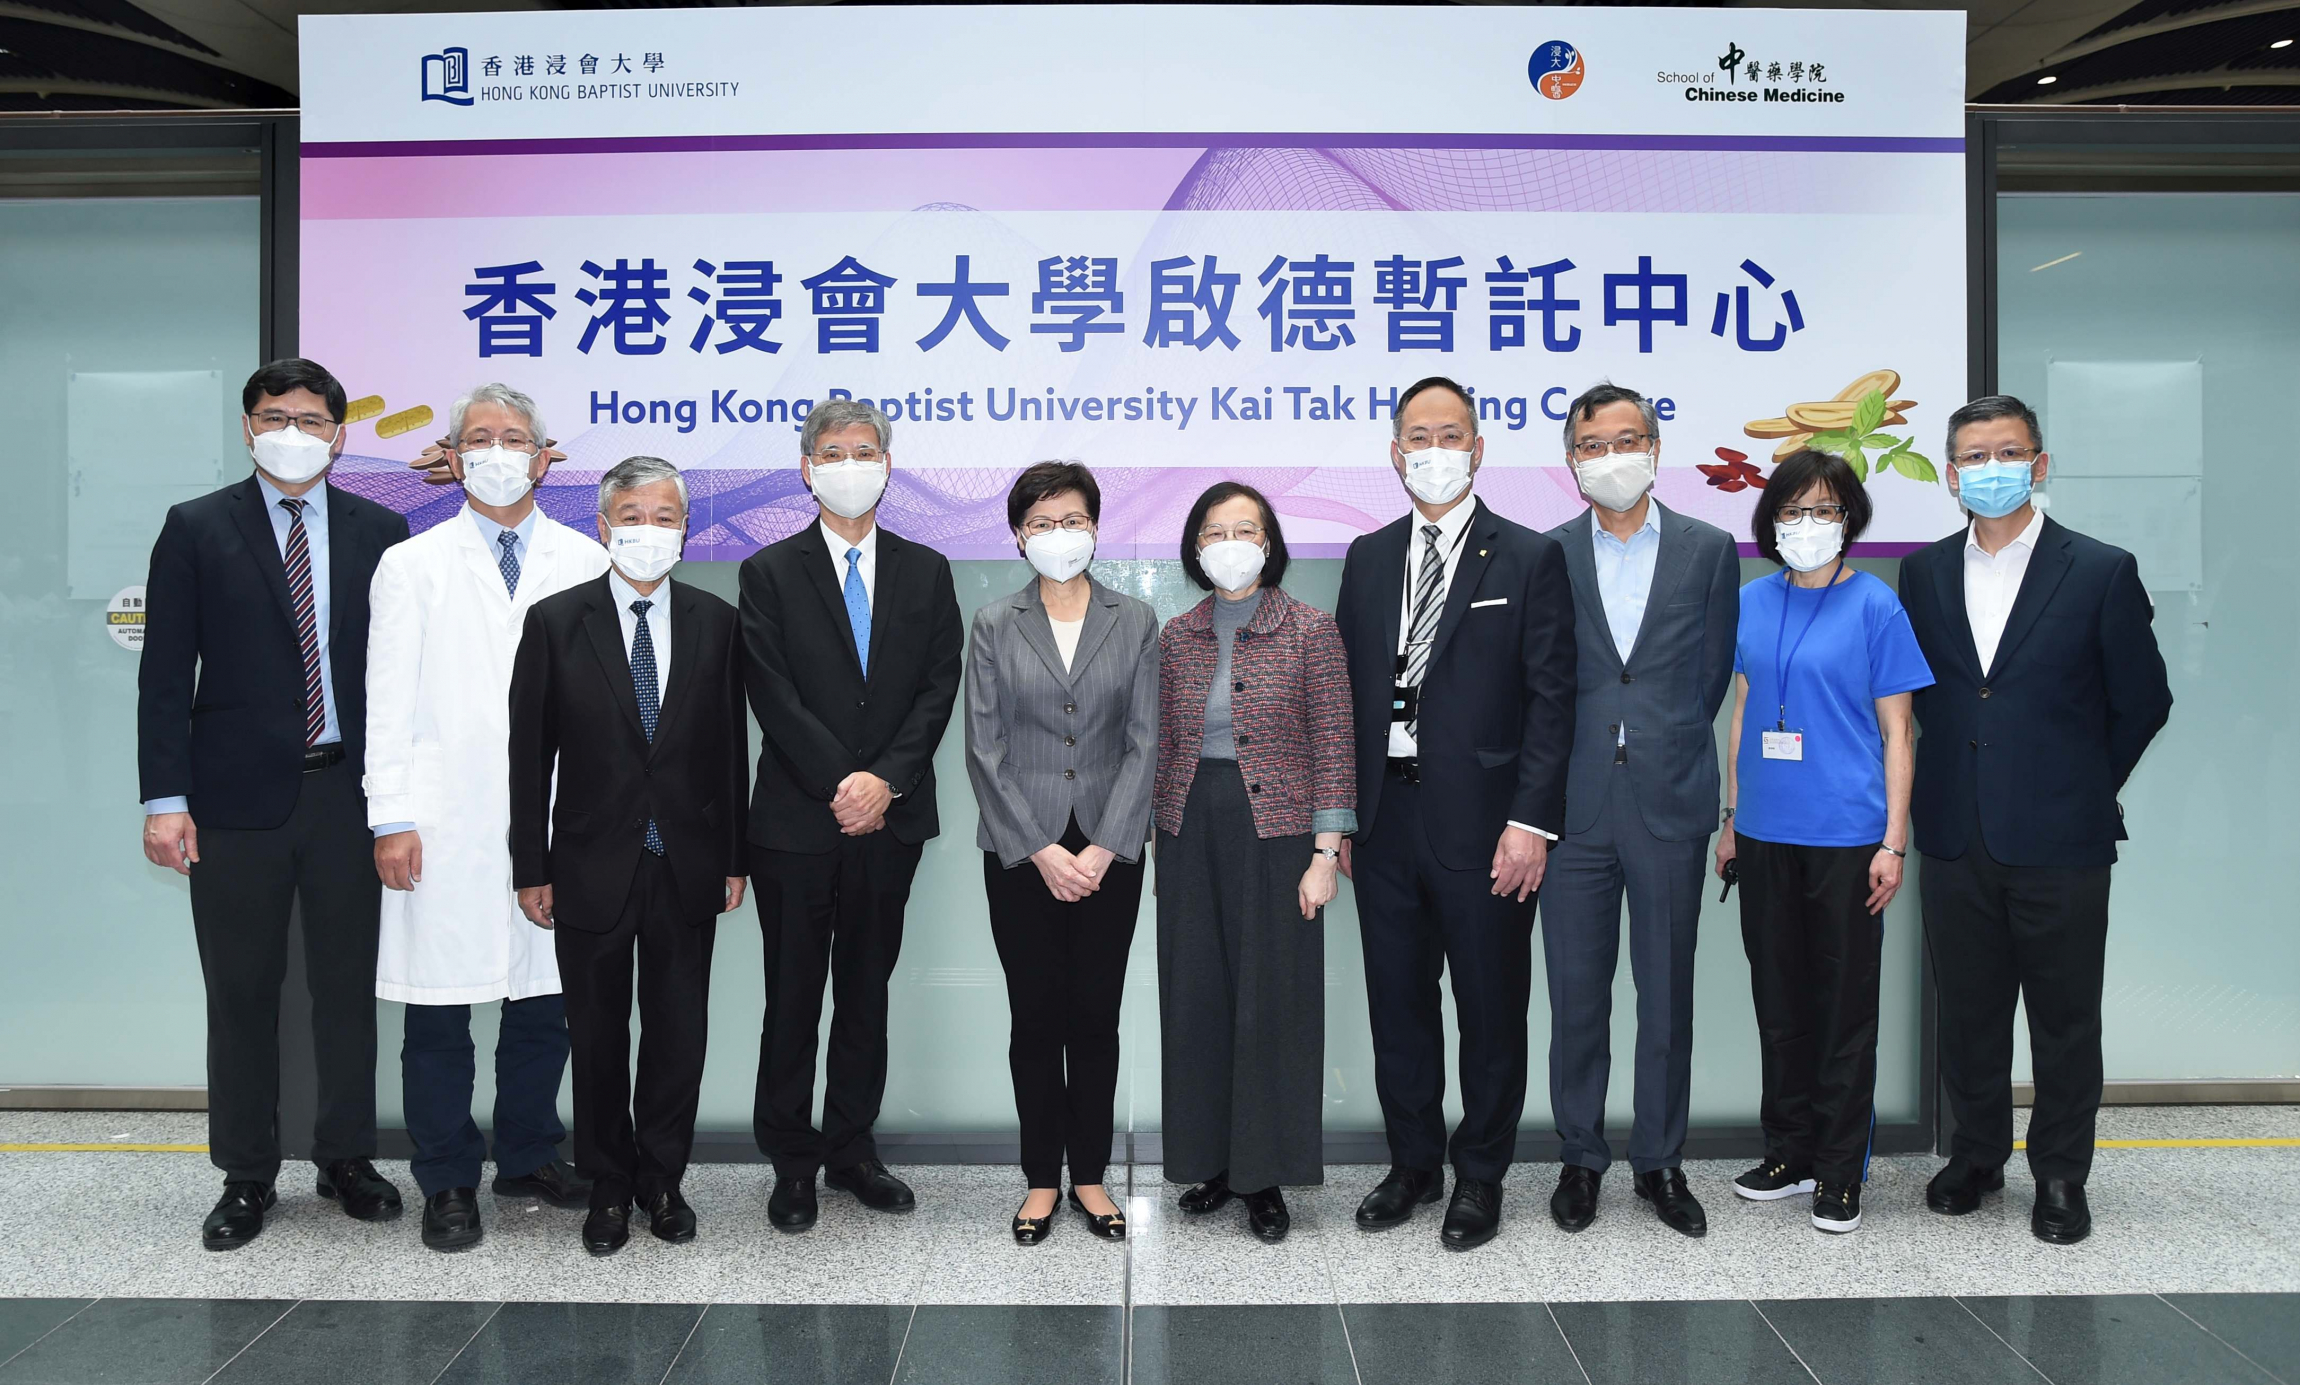 Mrs Carrie Lam, Chief Executive (5th left); Professor Sophia Chan, Secretary for Food and Health (5th right); Dr Law Chi-kwong, Secretary for Labour and Welfare (4th left); Mr Gordon Leung, Director of Social Welfare (1st right) of the Hong Kong Special Administrative Region; Dr Ko Pat-sing, Chief Executive of the Hospital Authority (1st left); and Dr Lam Ching-choi, Chief Executive Officer of the Haven of Hope Christian Service (3rd right), visit the Kai Tak Holding Centre operated by HKBU. They are received by Mr Paul Poon, Deputy Chairman of the Council and the Court (3rd left); Professor Alexander Wai, President and Vice-Chancellor (4th right); and Professor Bian Zhaoxiang, Associate Vice-President (Chinese Medicine Development) (2nd left) of HKBU.